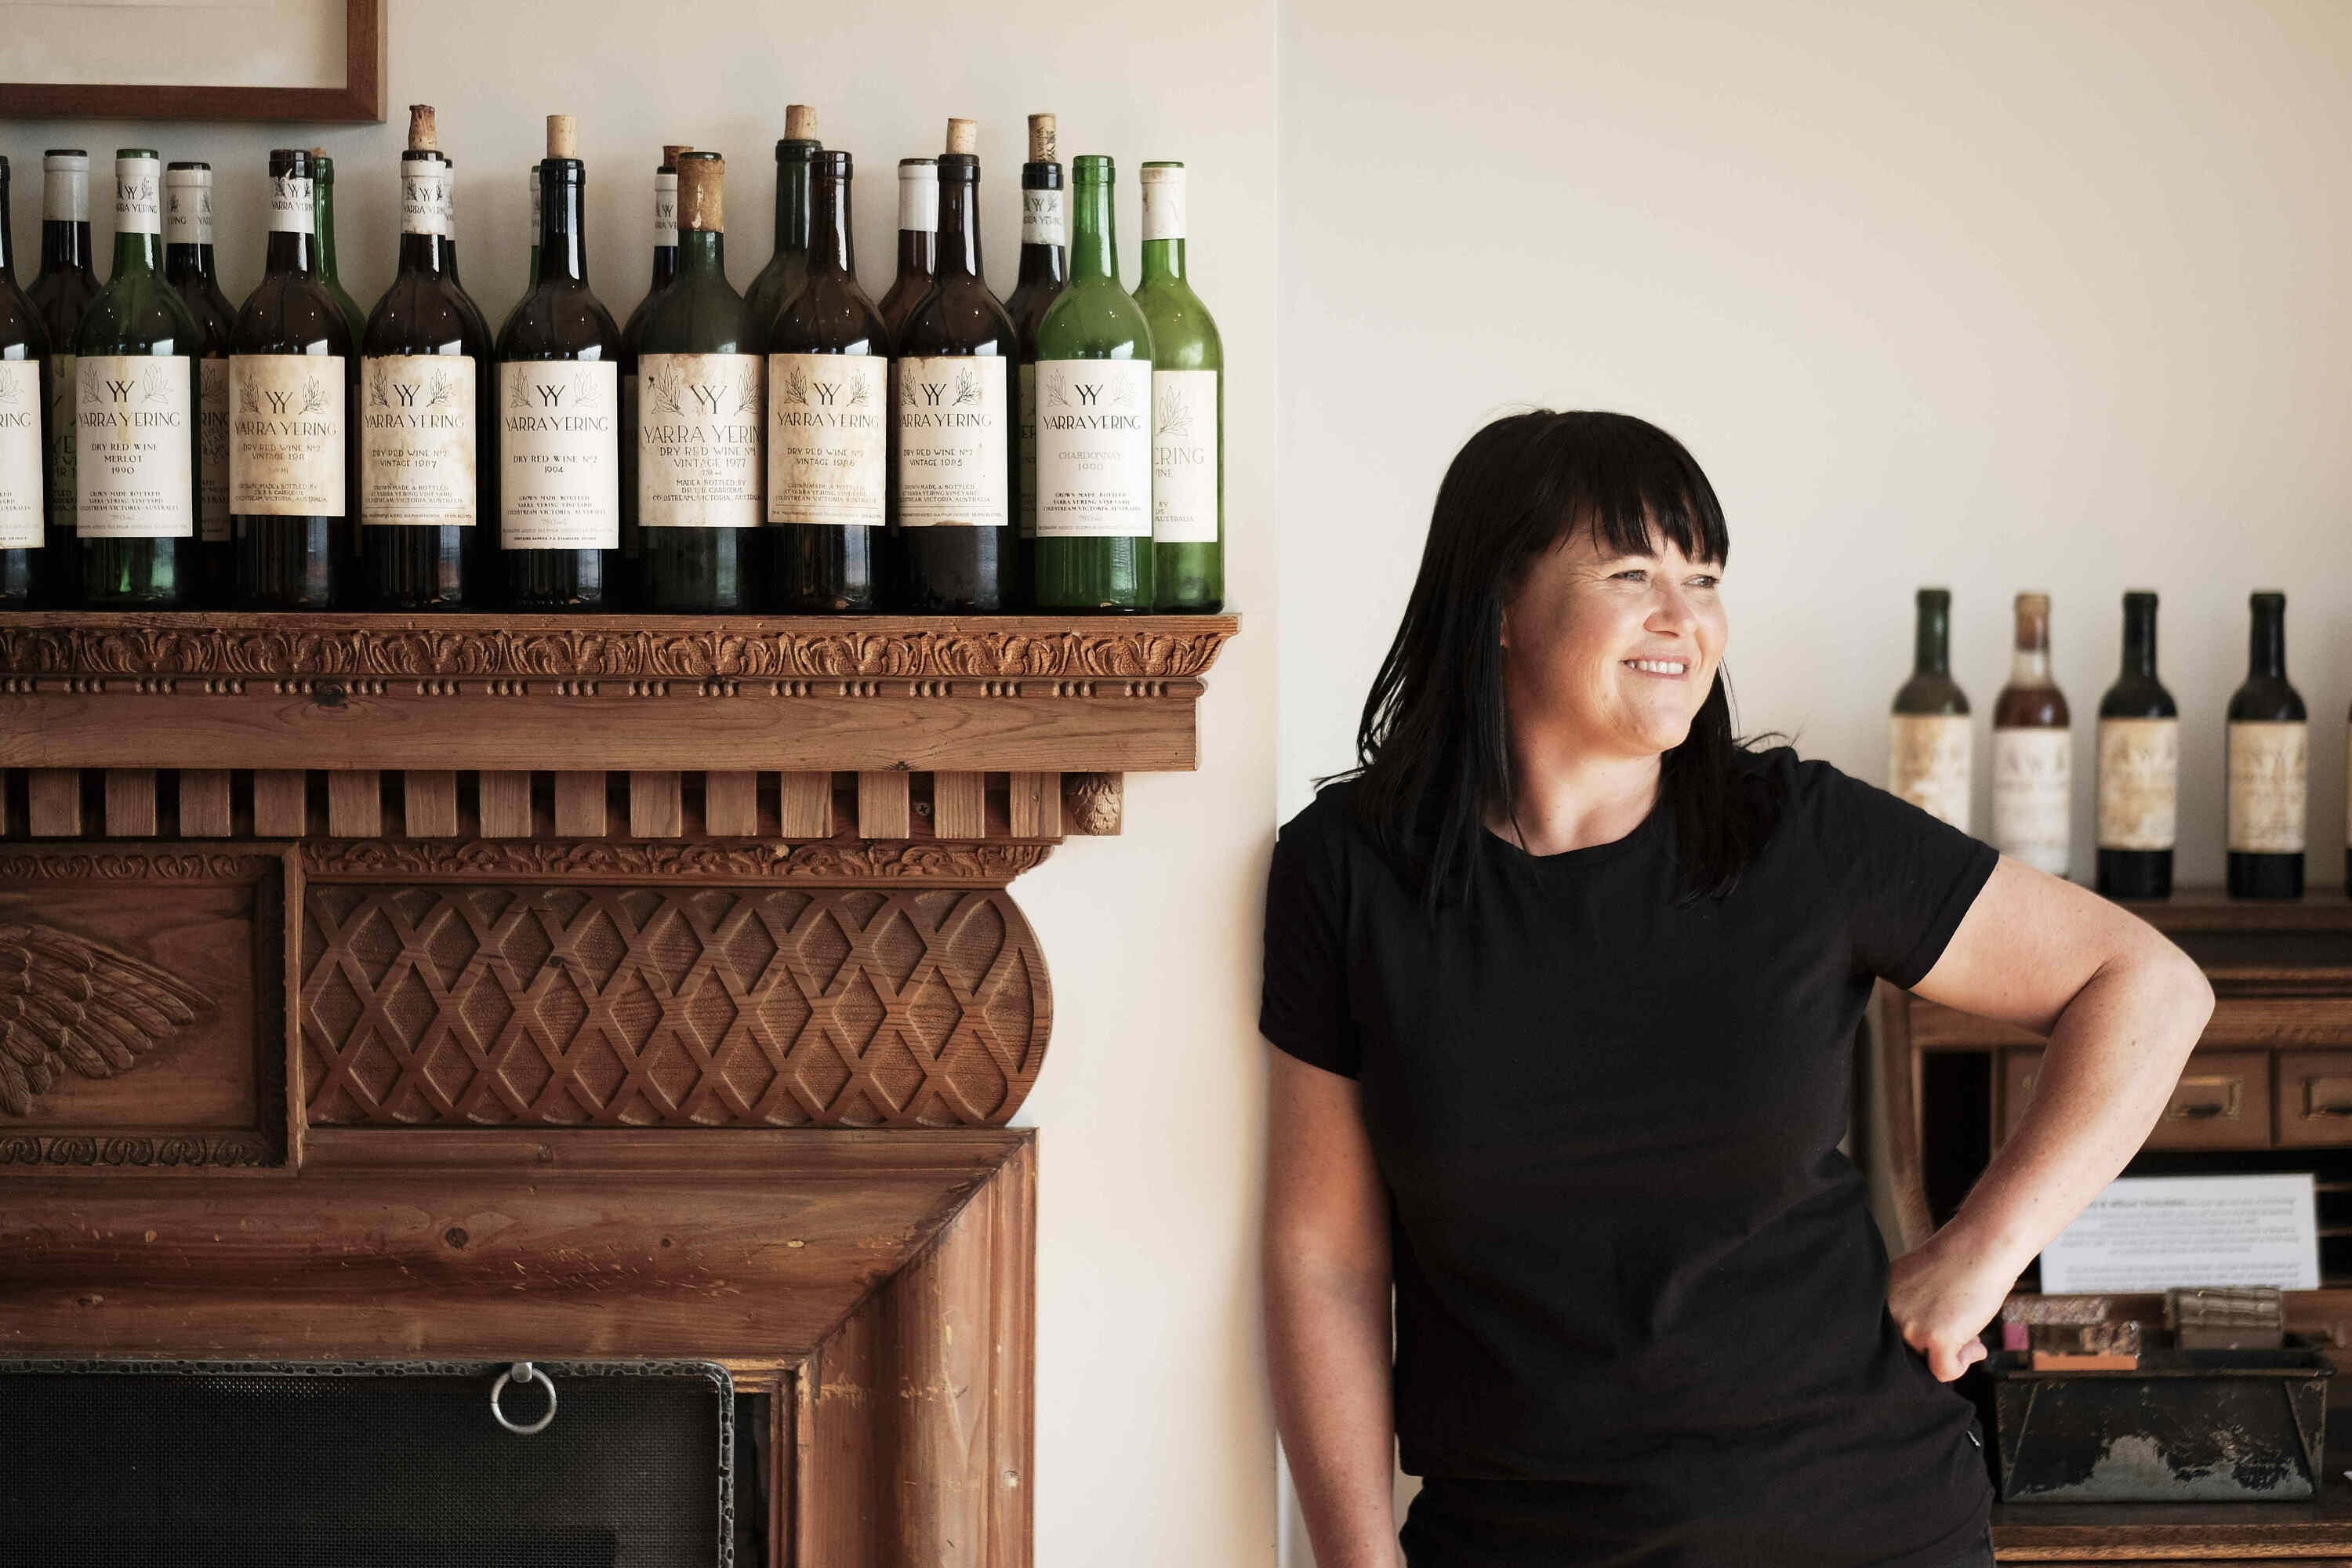 Winemaker Sarah Crowe smiling for the camera with bottles of wine.